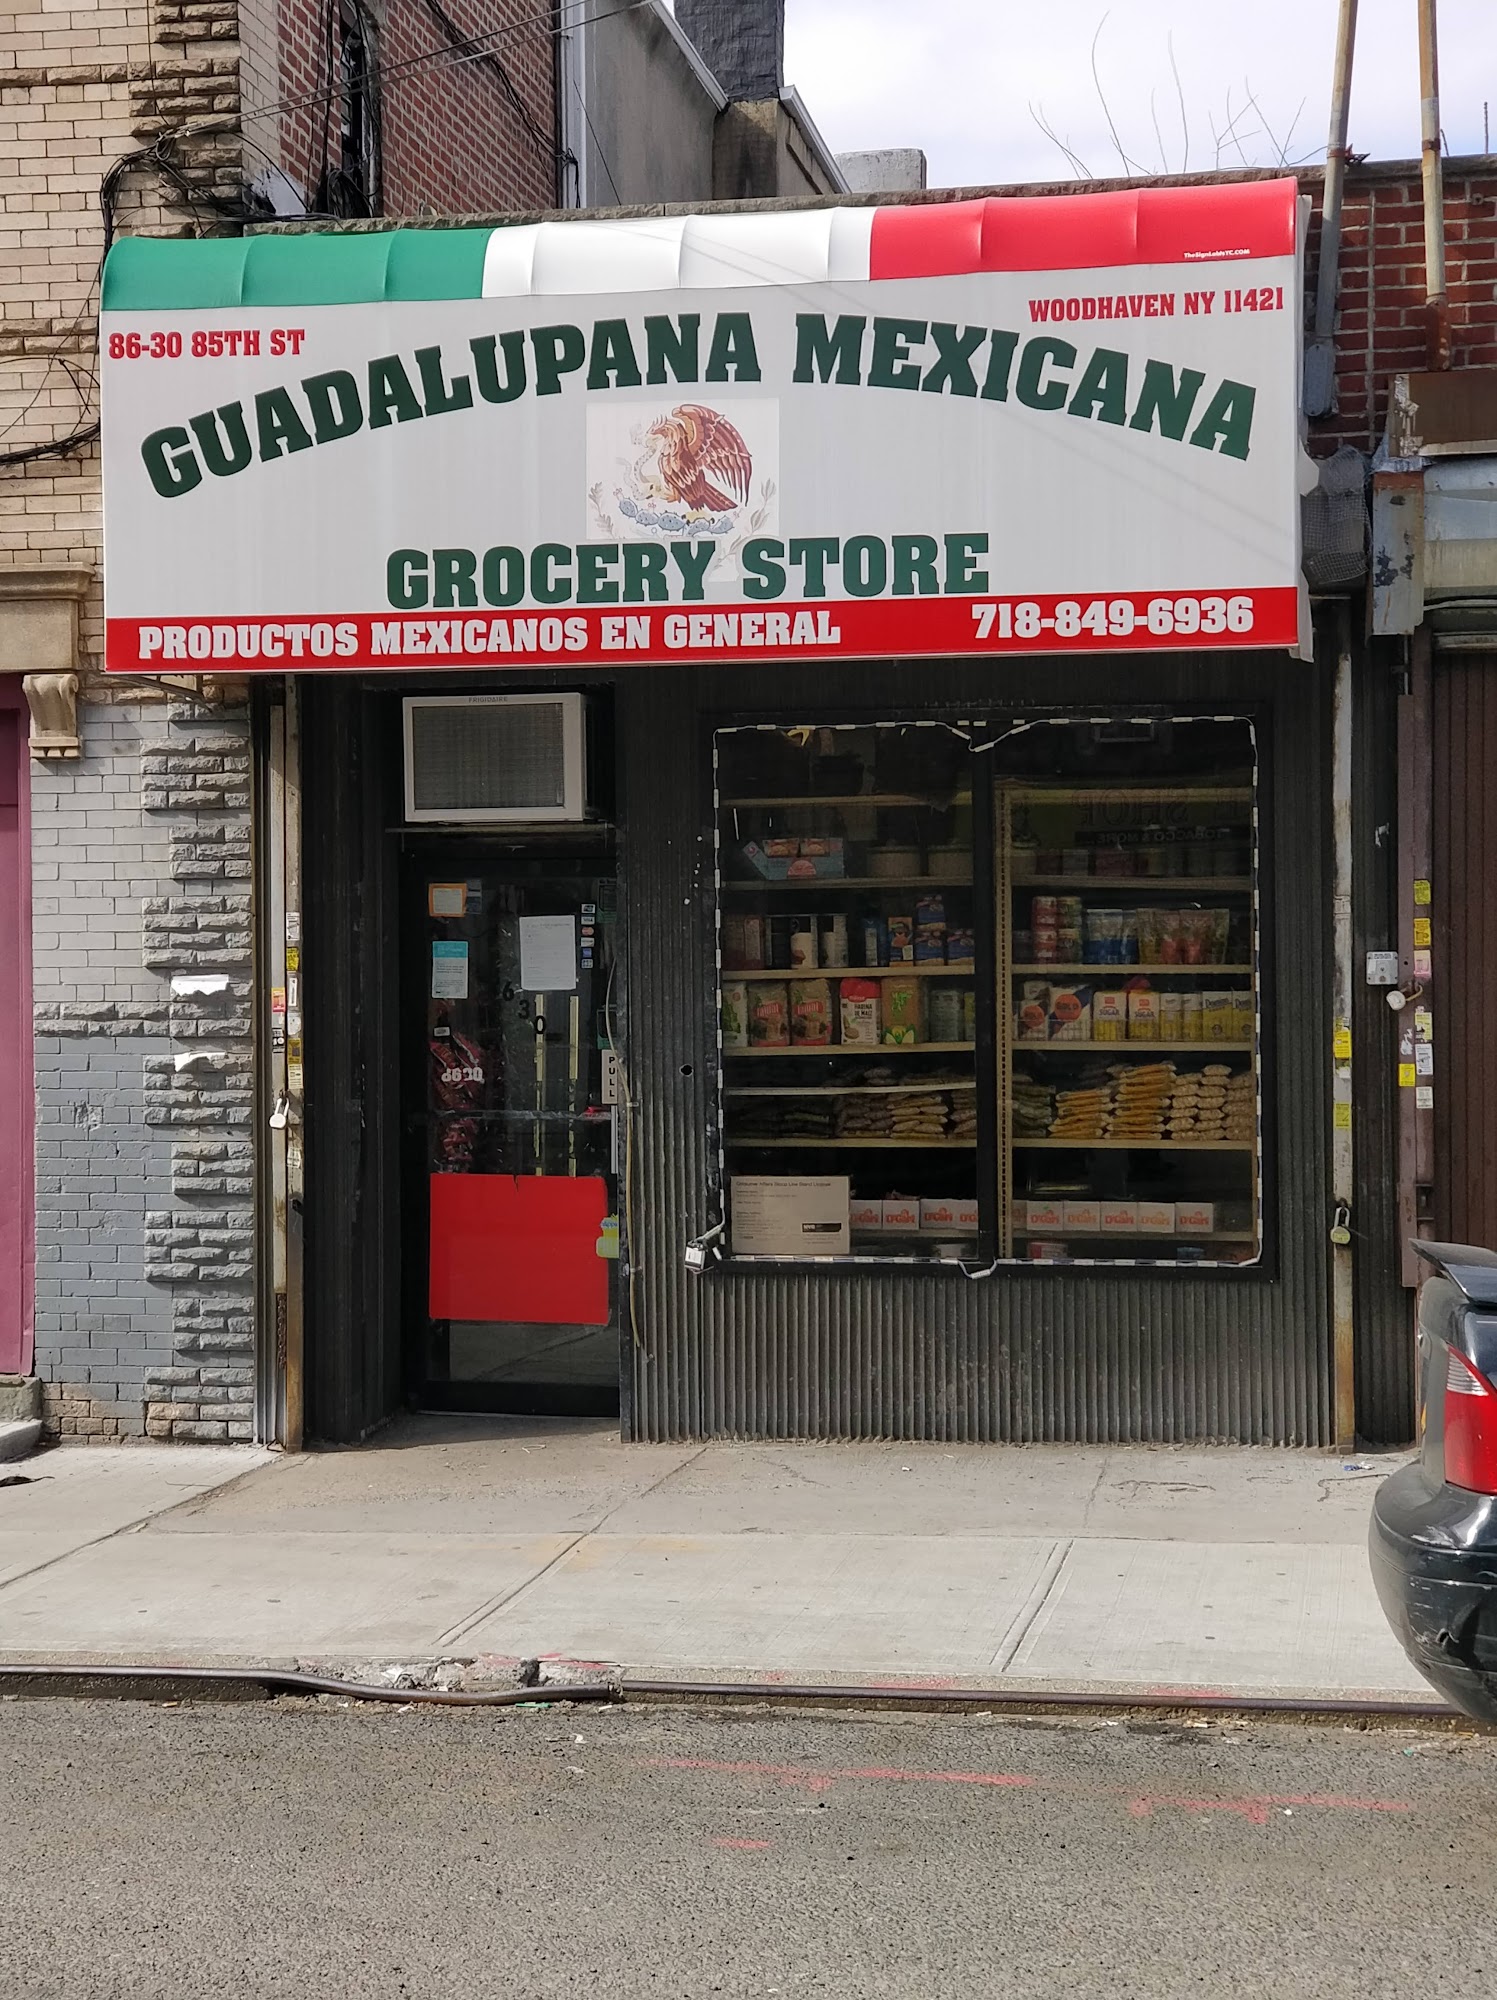 Guadalupana Mexicana Grocery